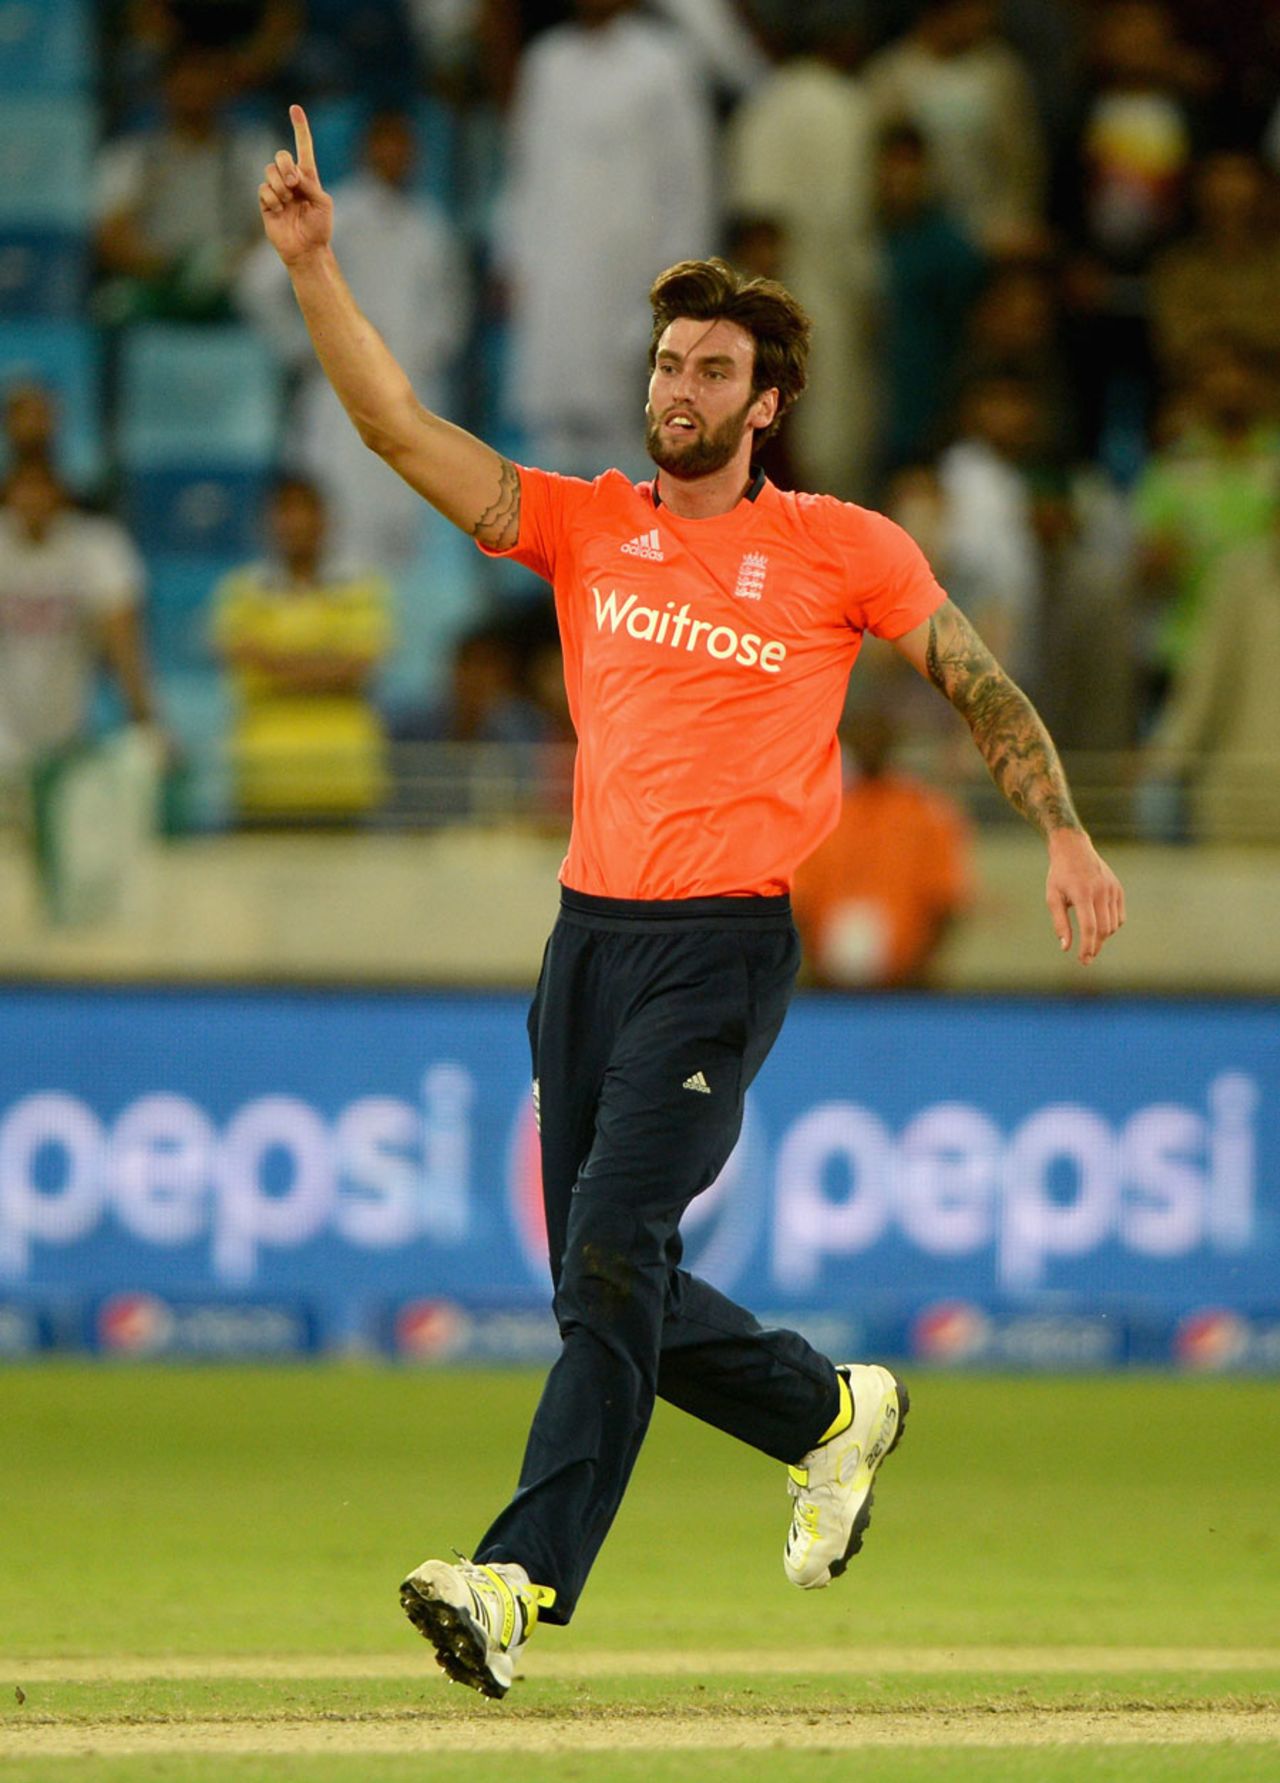 Reece Topley wrapped up the match with figures of 3 for 24, Pakistan v England, first T20, Dubai, November 26, 2015